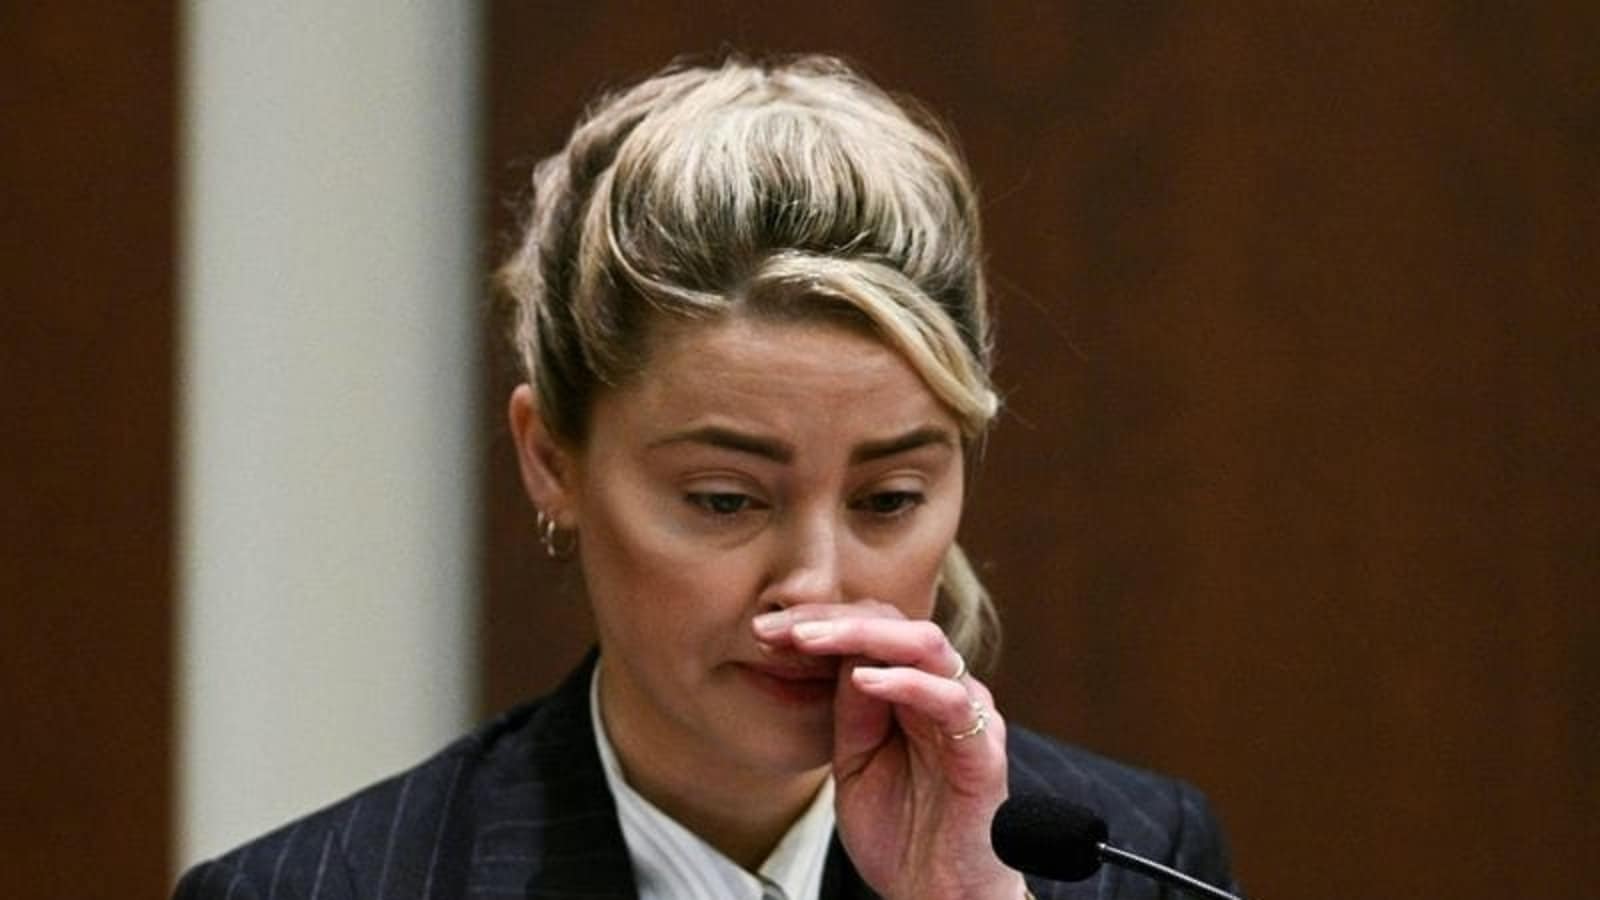 Amber Heard says she has received threats ‘every single day’ during trial: ‘People want to put my baby in a microwave’